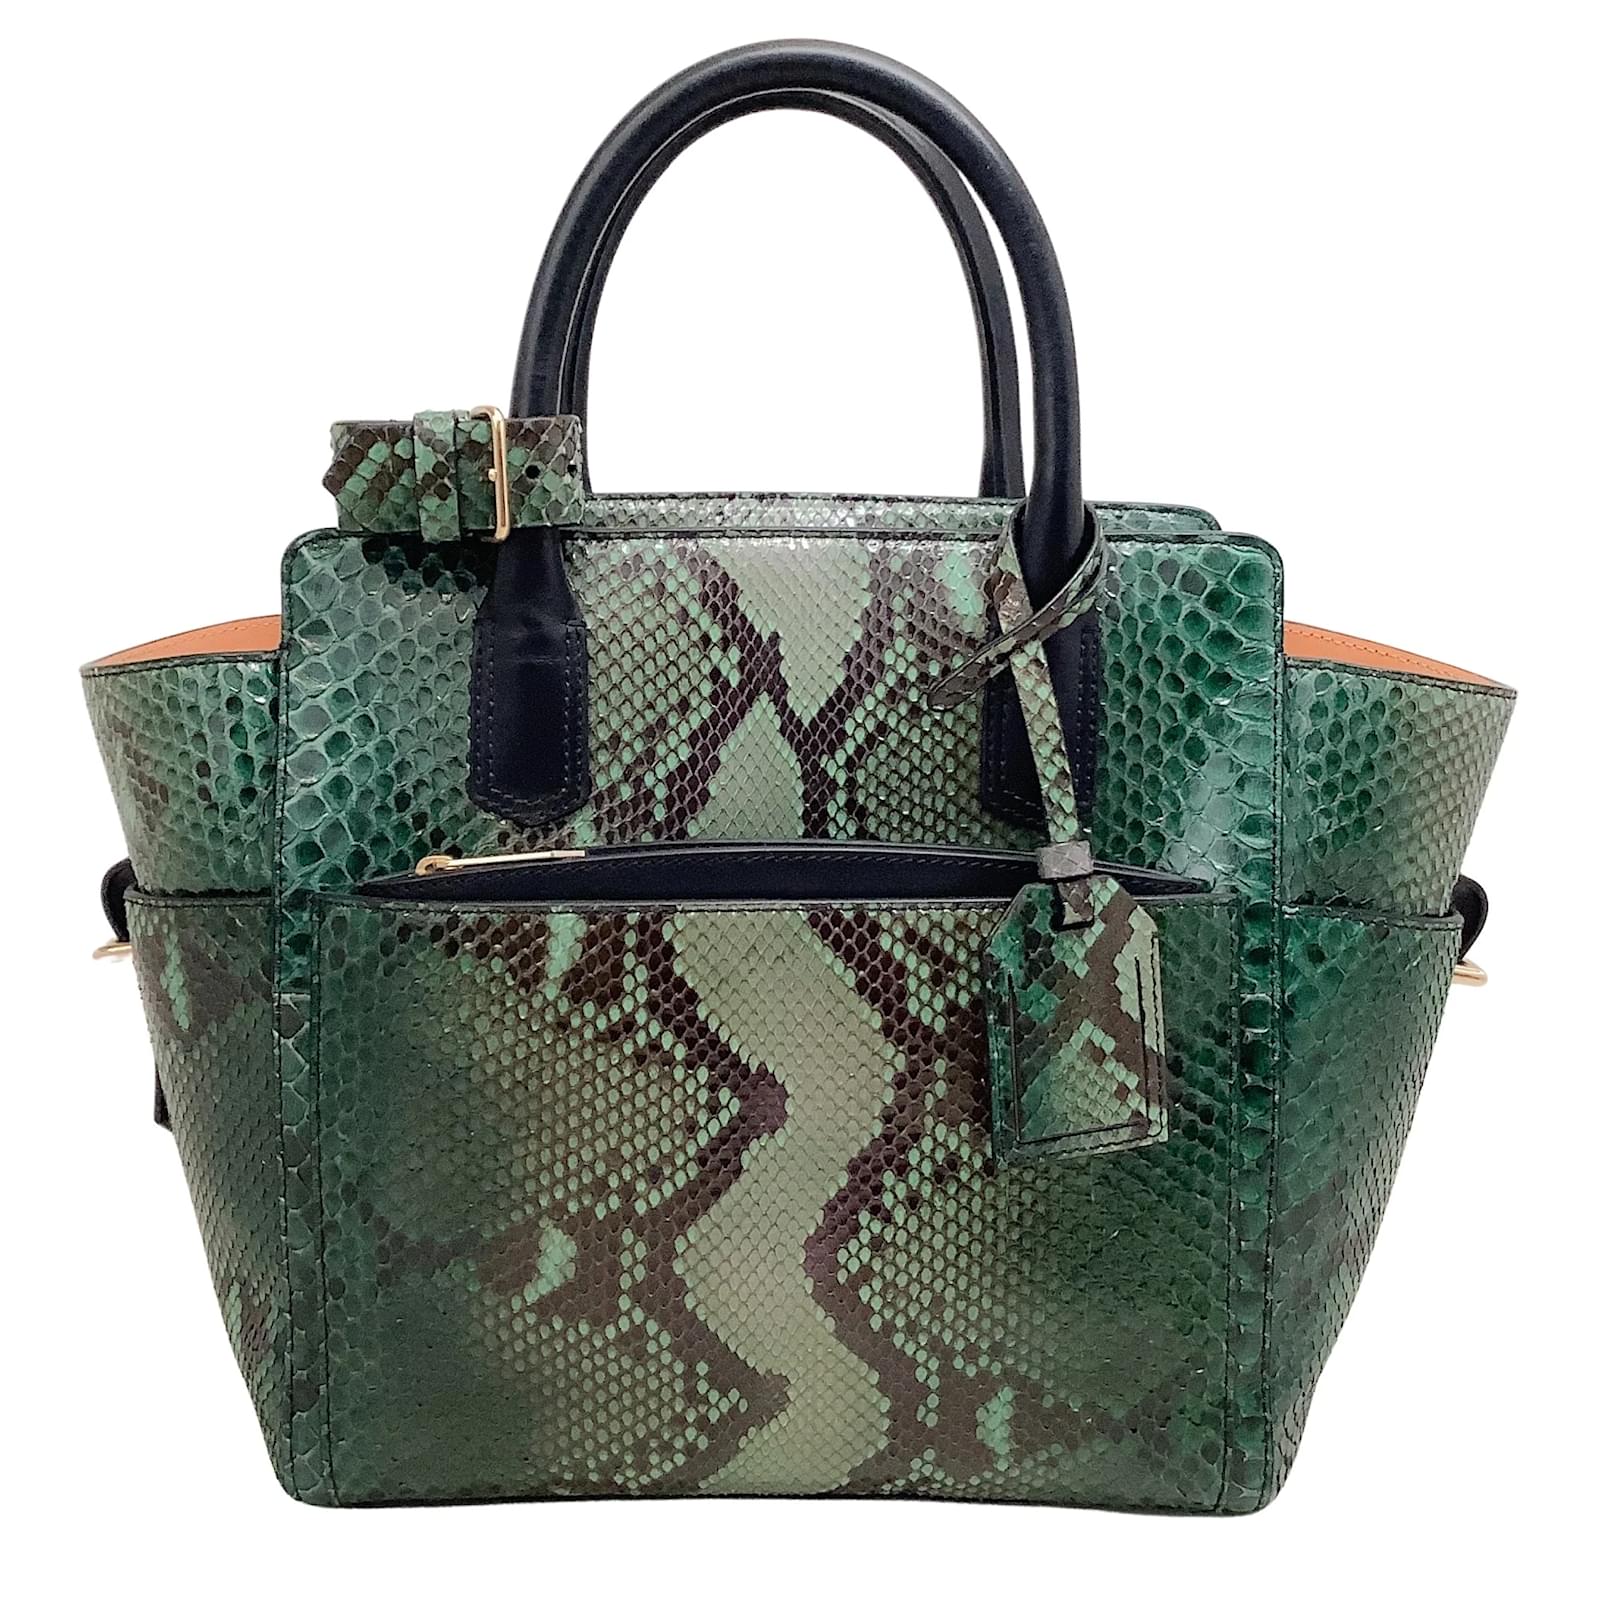 Reed Krakoff Atlantique Python and Leather Tote